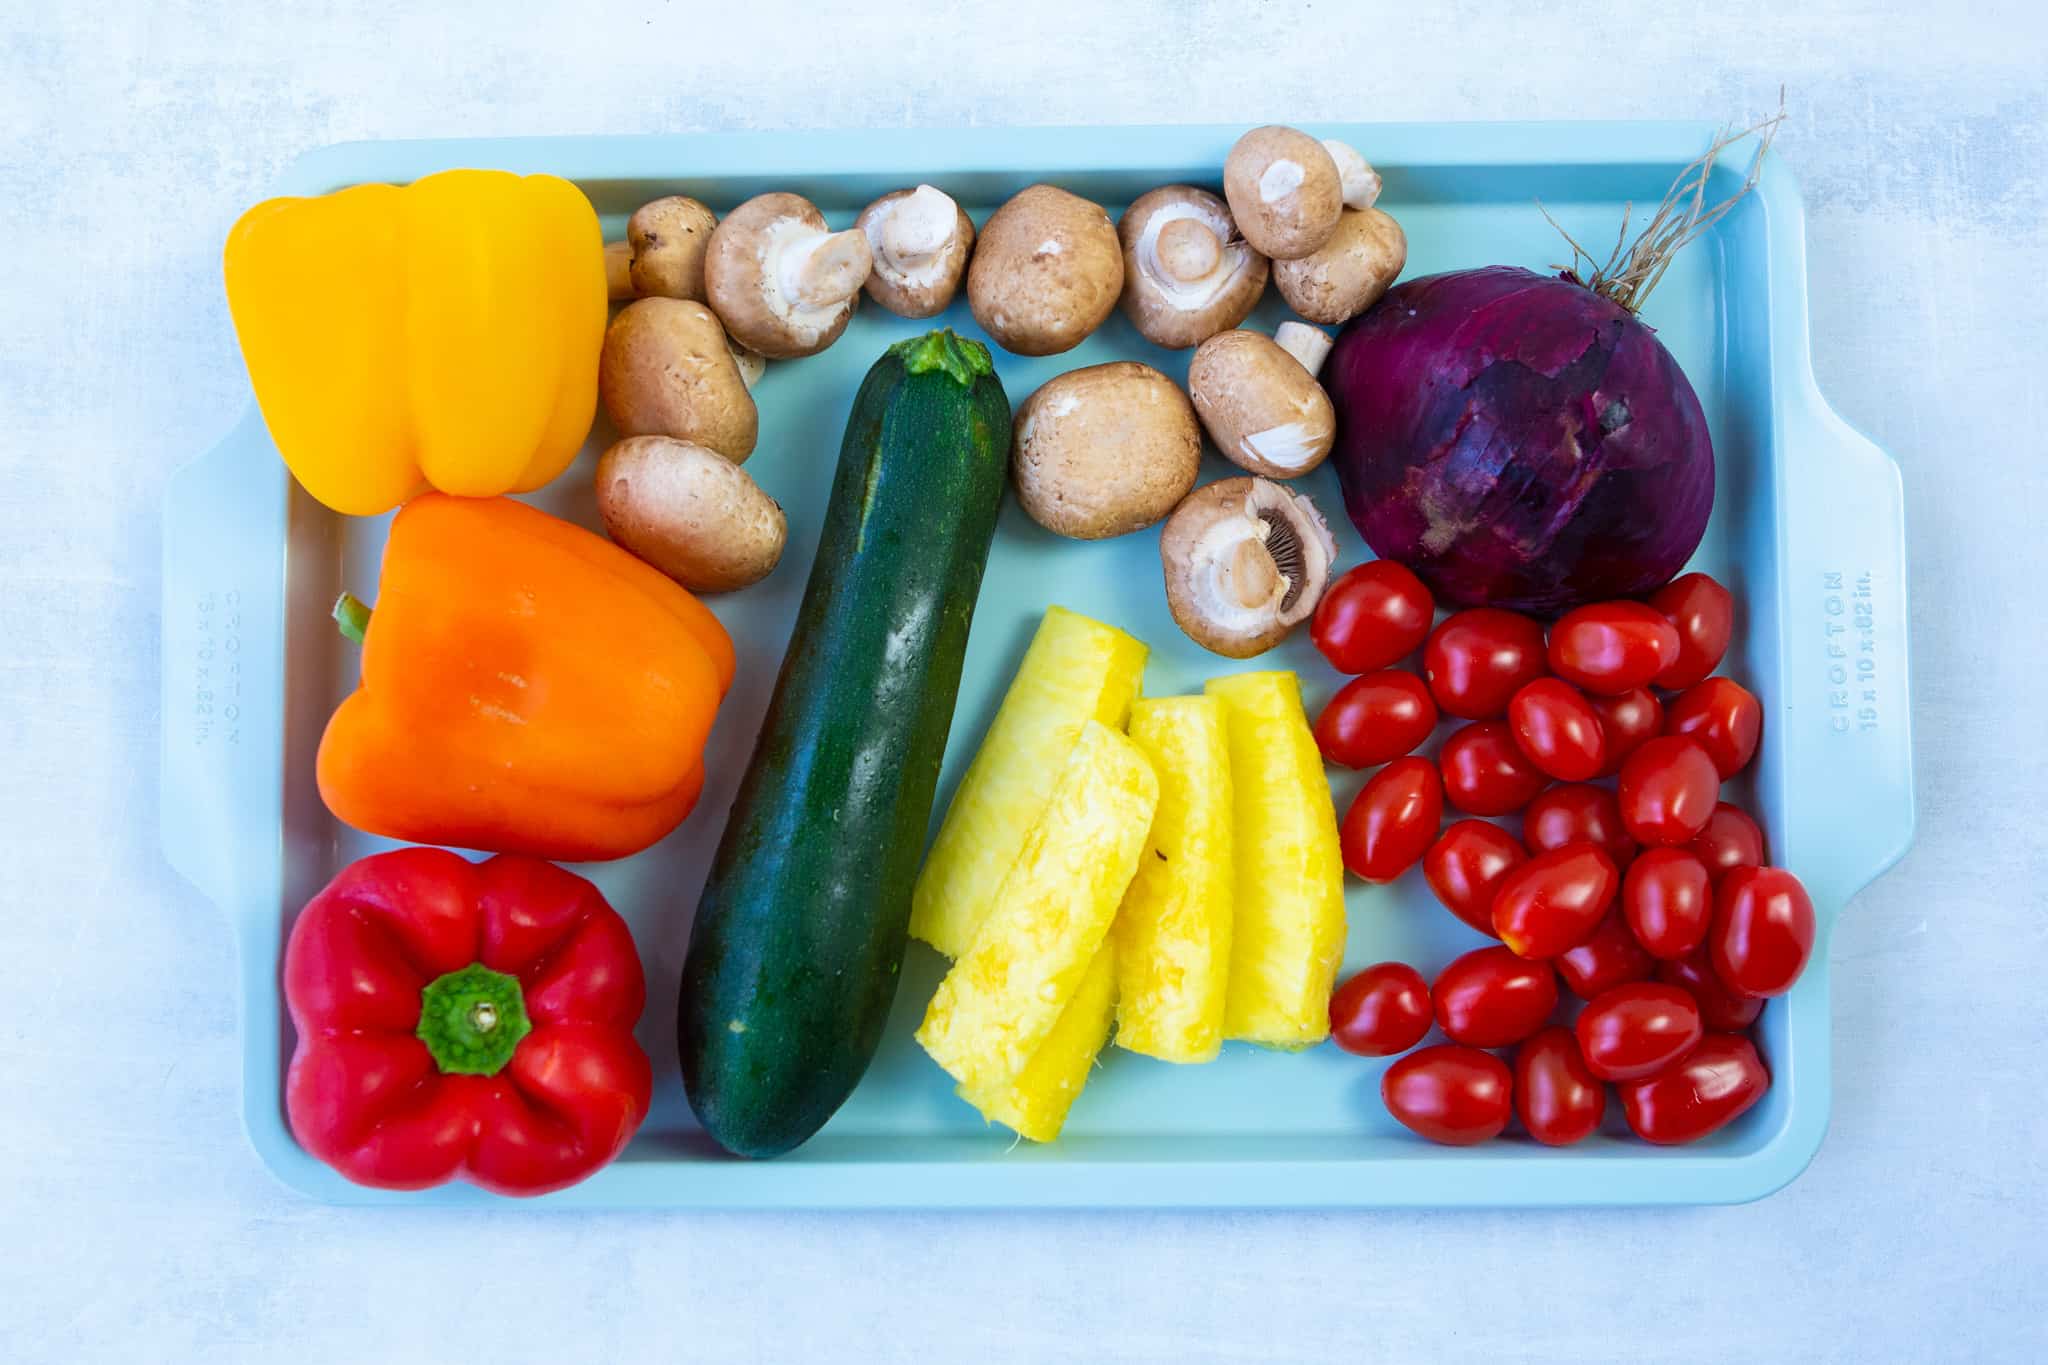 fruit and vegetables on a serving tray